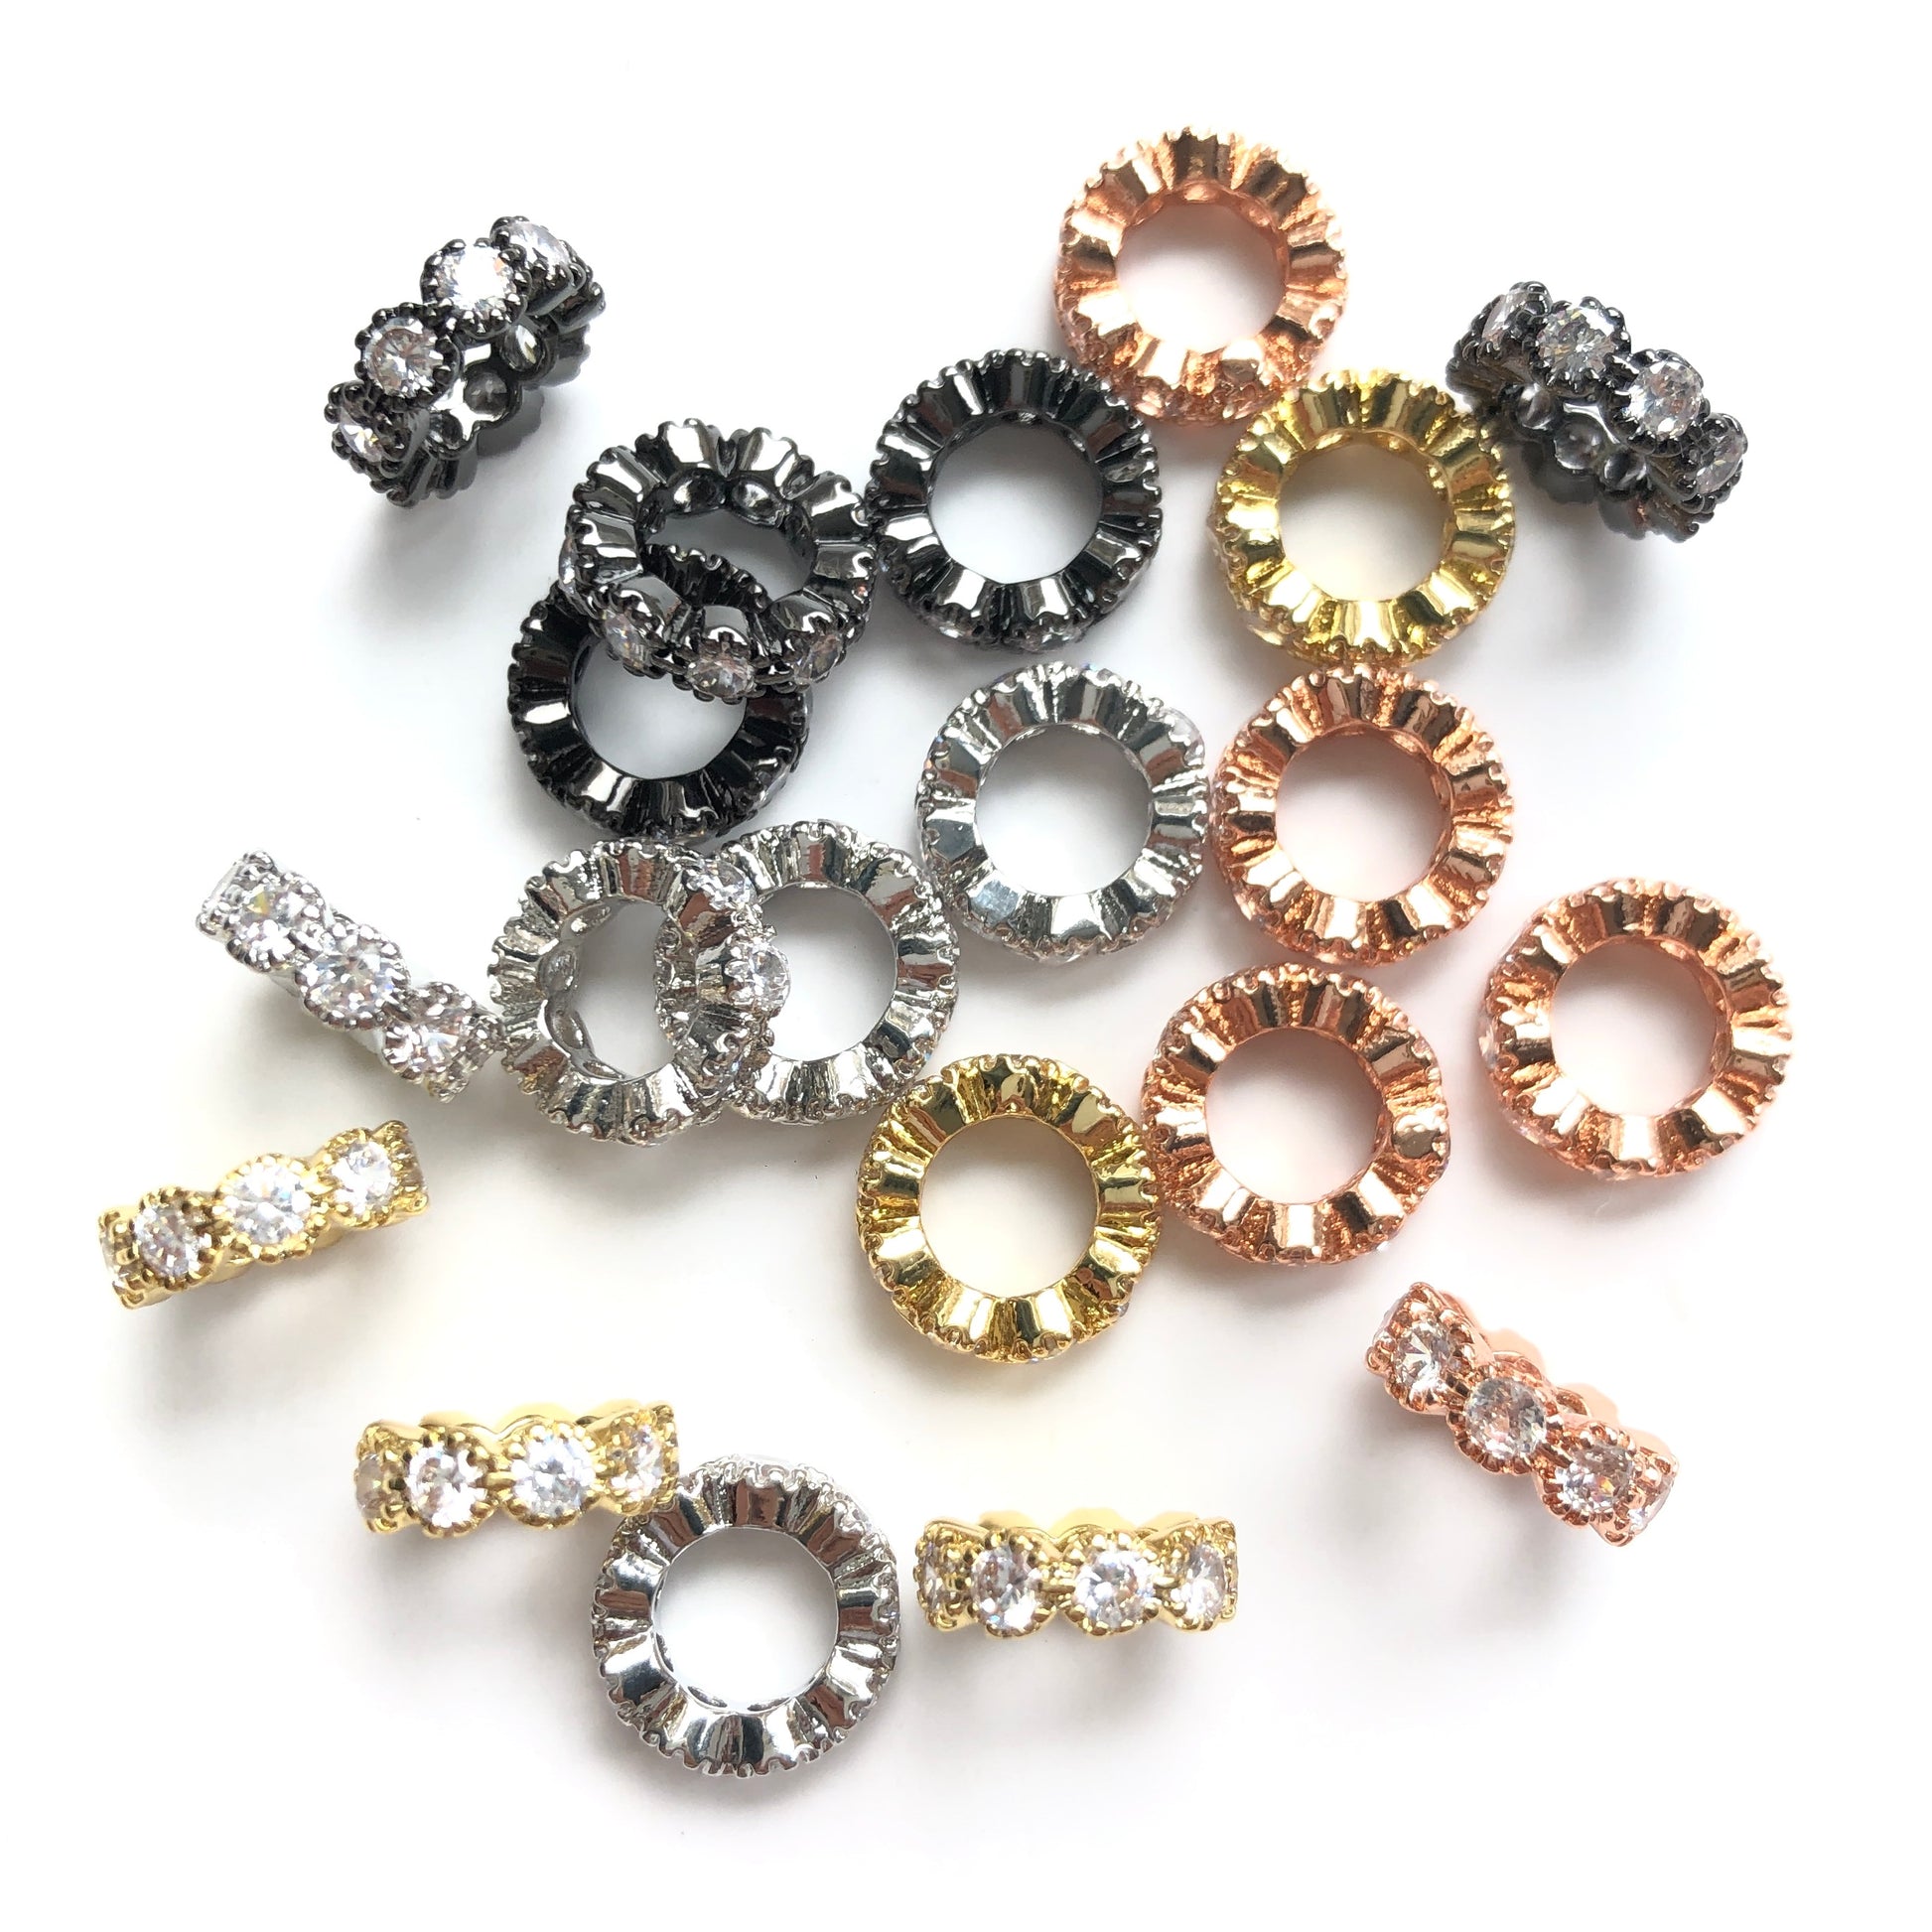 20pcs/lot 8/10mm Big Hole CZ Pave Wheel Rondelle Spacers Mix Colors CZ Paved Spacers New Spacers Arrivals Rondelle Beads Charms Beads Beyond